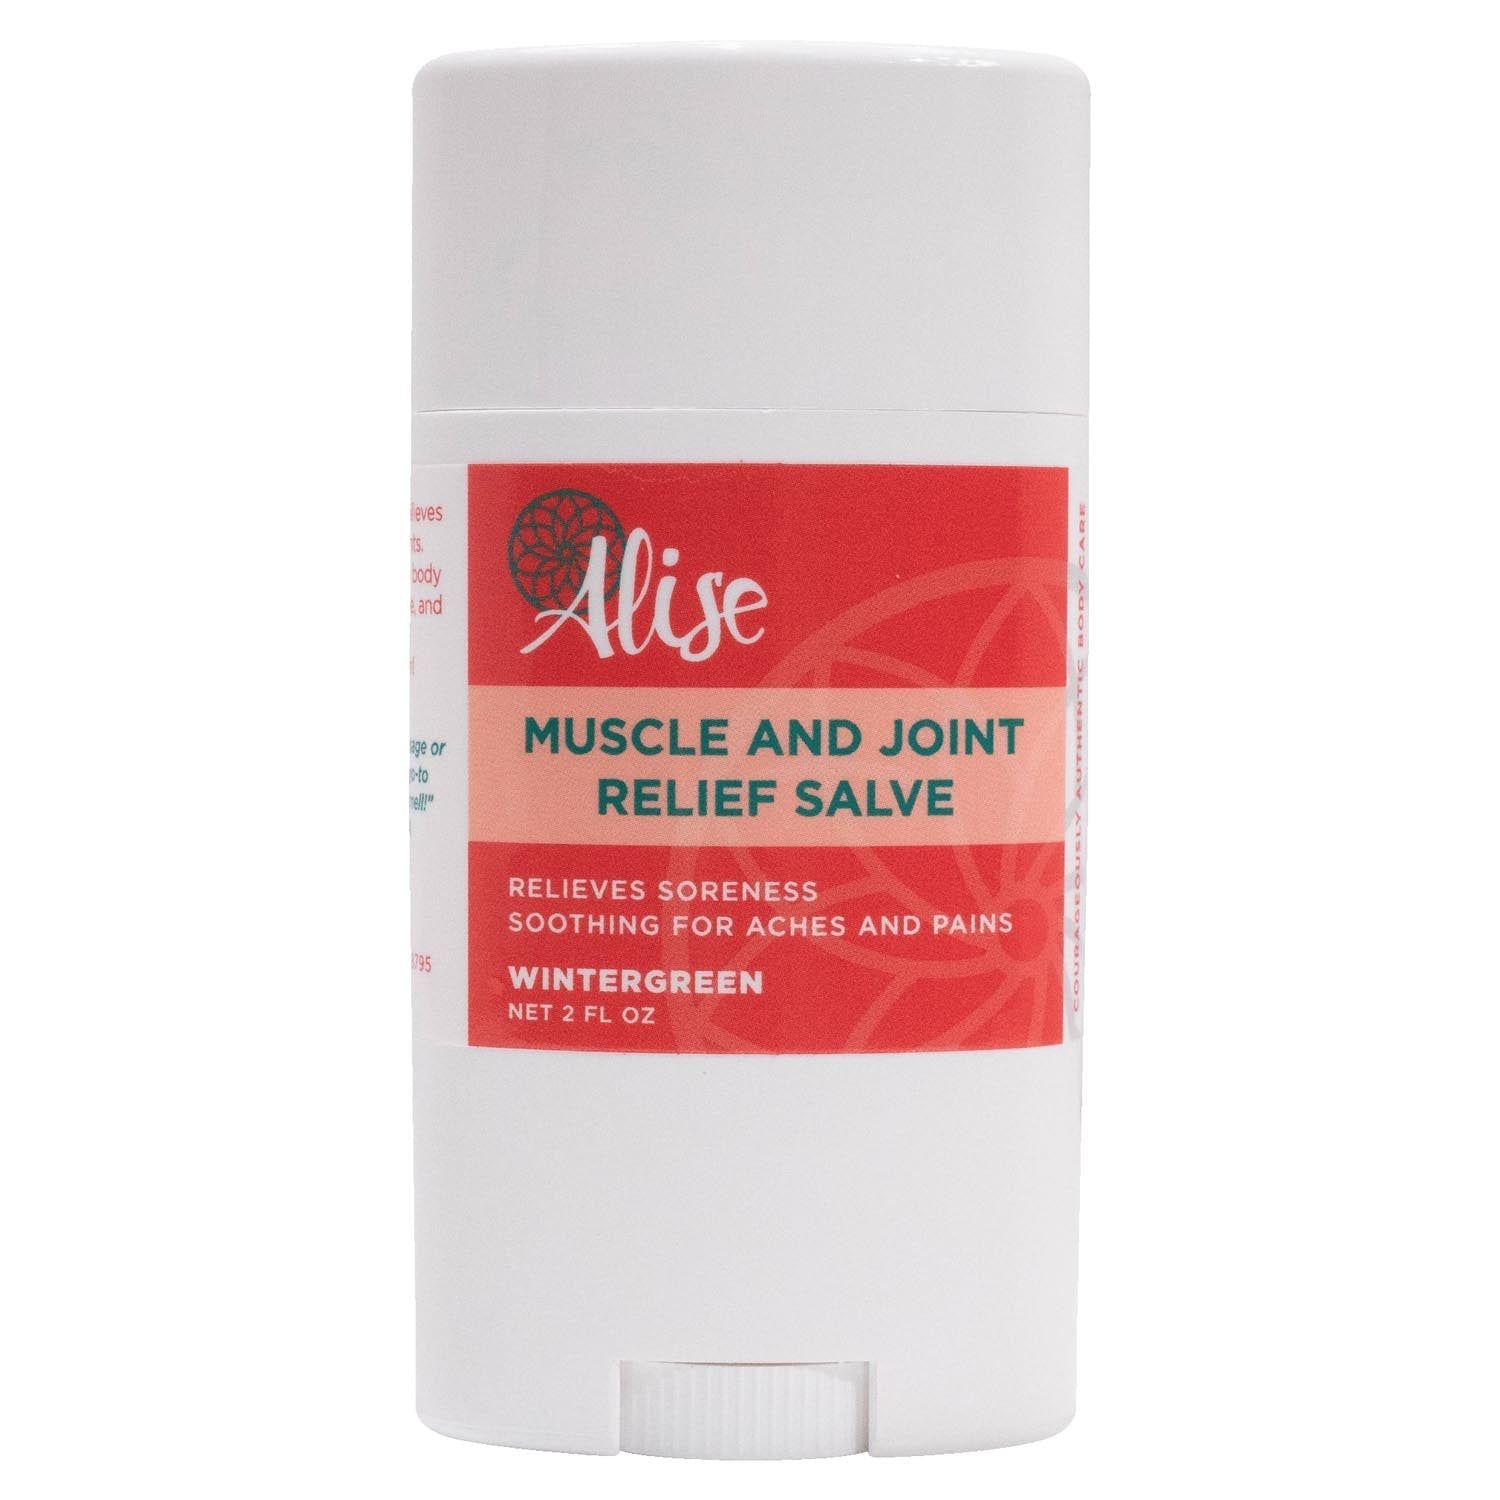 https://cdn.shopify.com/s/files/1/0660/1044/8100/files/muscle-and-joint-relief-salve-wintergreen-2oz-rub-on-alise-body-care-536652_c16b094e-f327-4c6f-b626-9e38b7402c3c.jpg?v=1699406775&width=1500